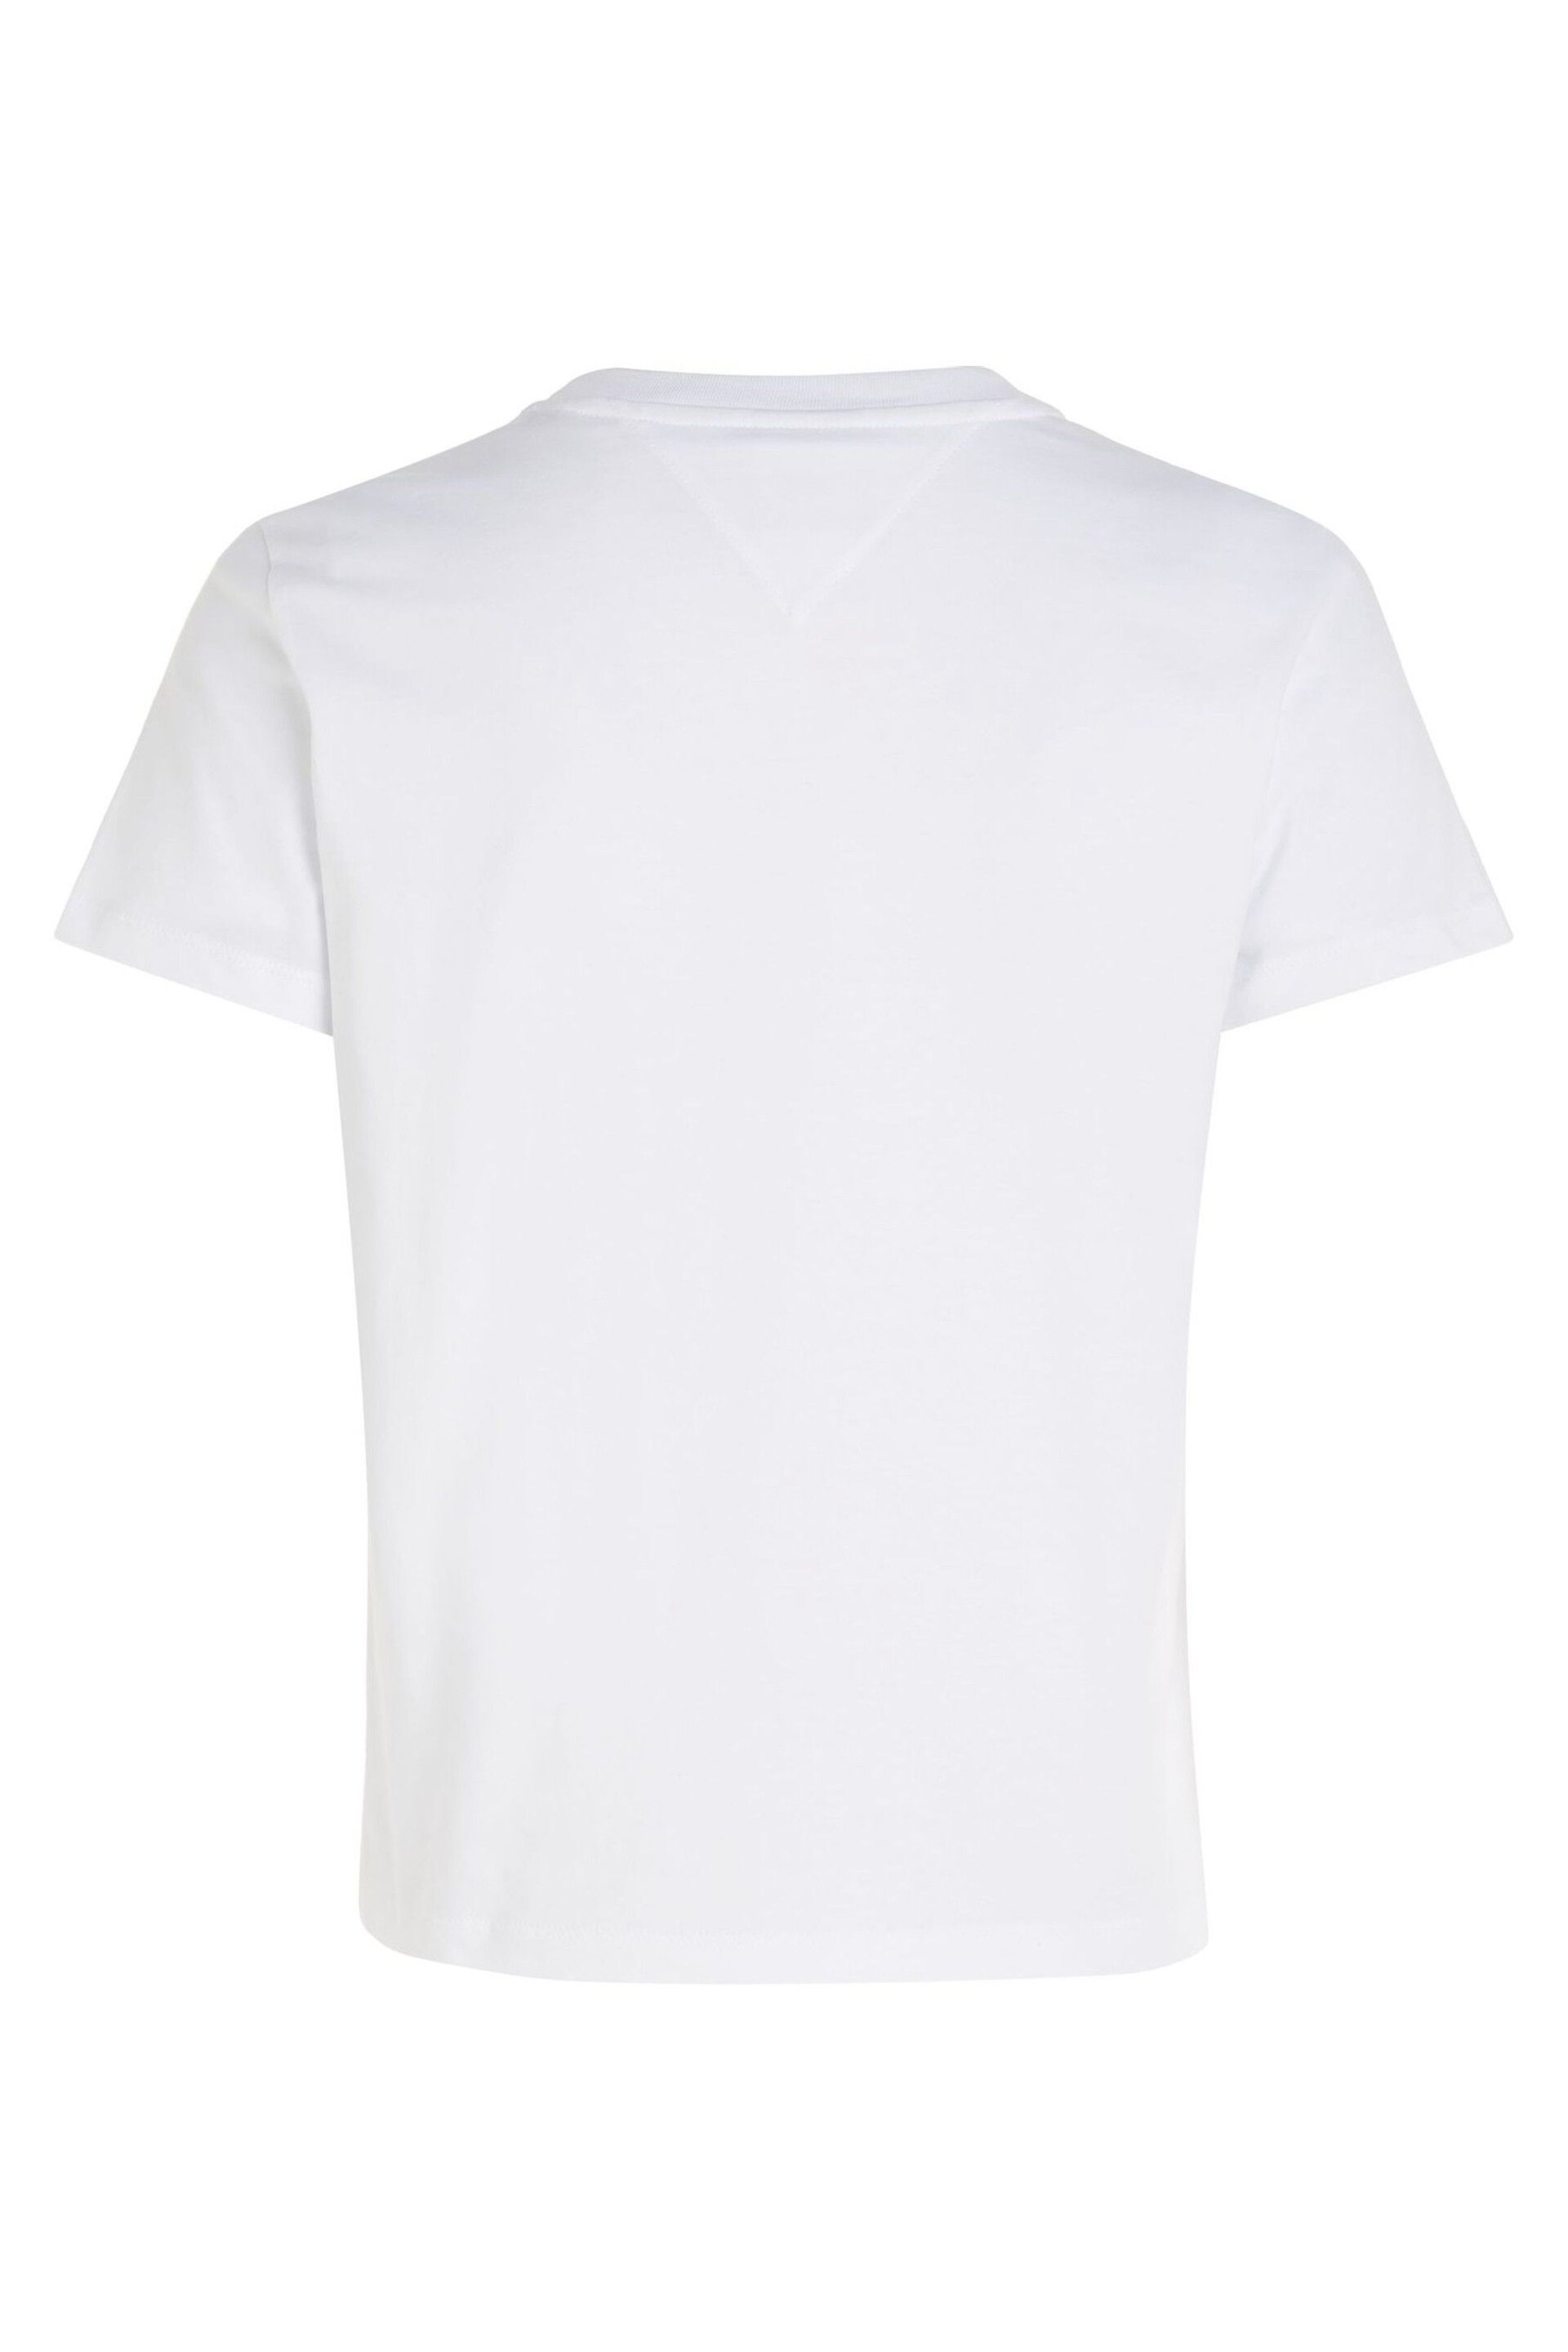 Tommy Jeans Palm Print White T-Shirt - Image 5 of 6